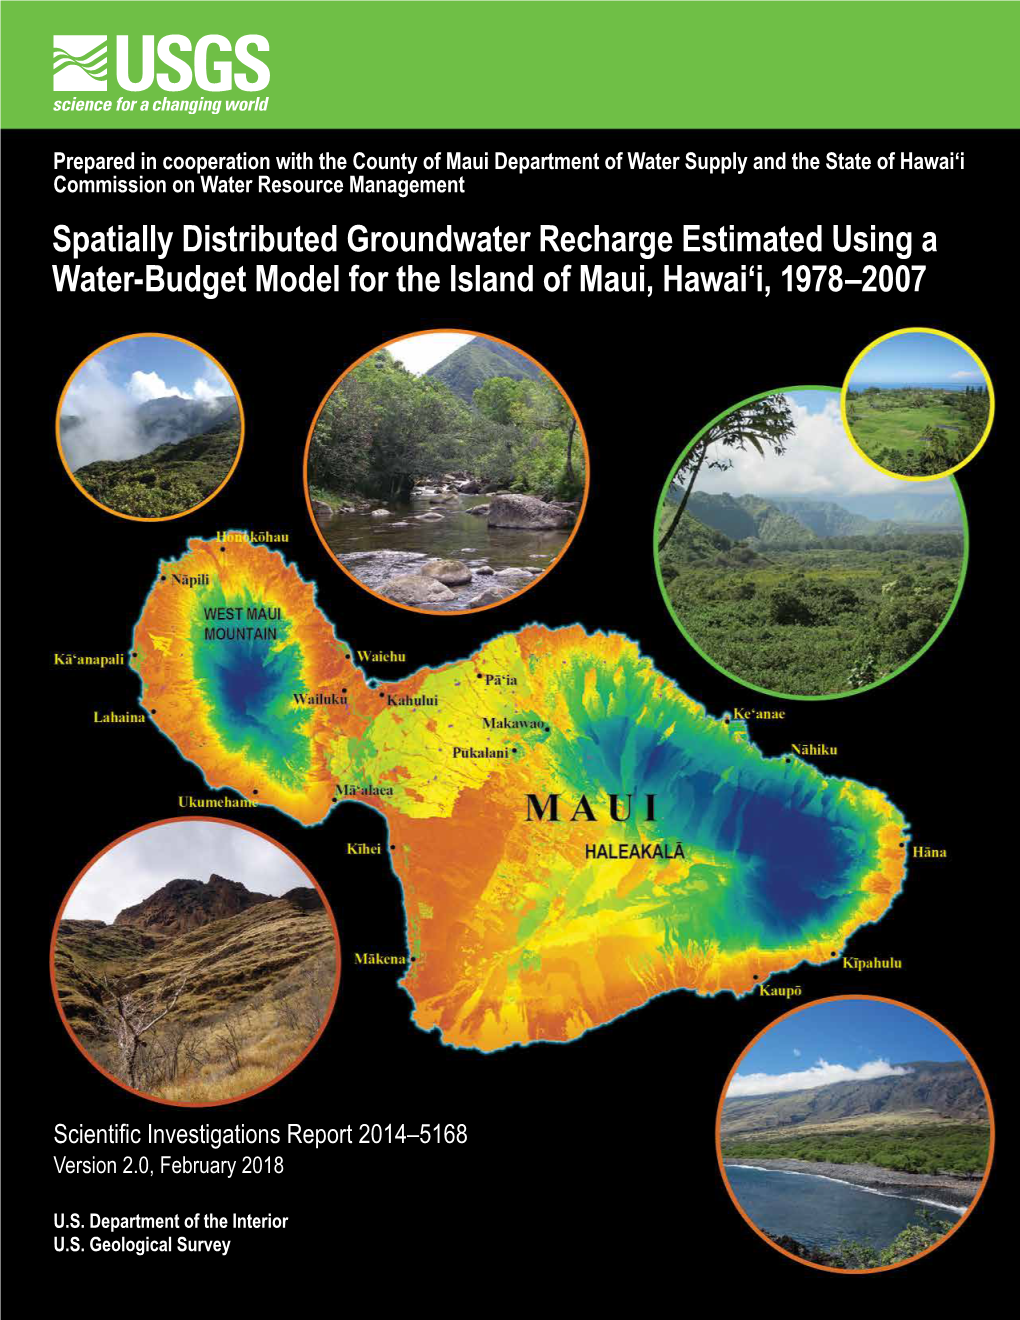 Spatially Distributed Groundwater Recharge Estimated Using a Water-Budget Model for the Island of Maui, Hawai‘I, 1978–2007